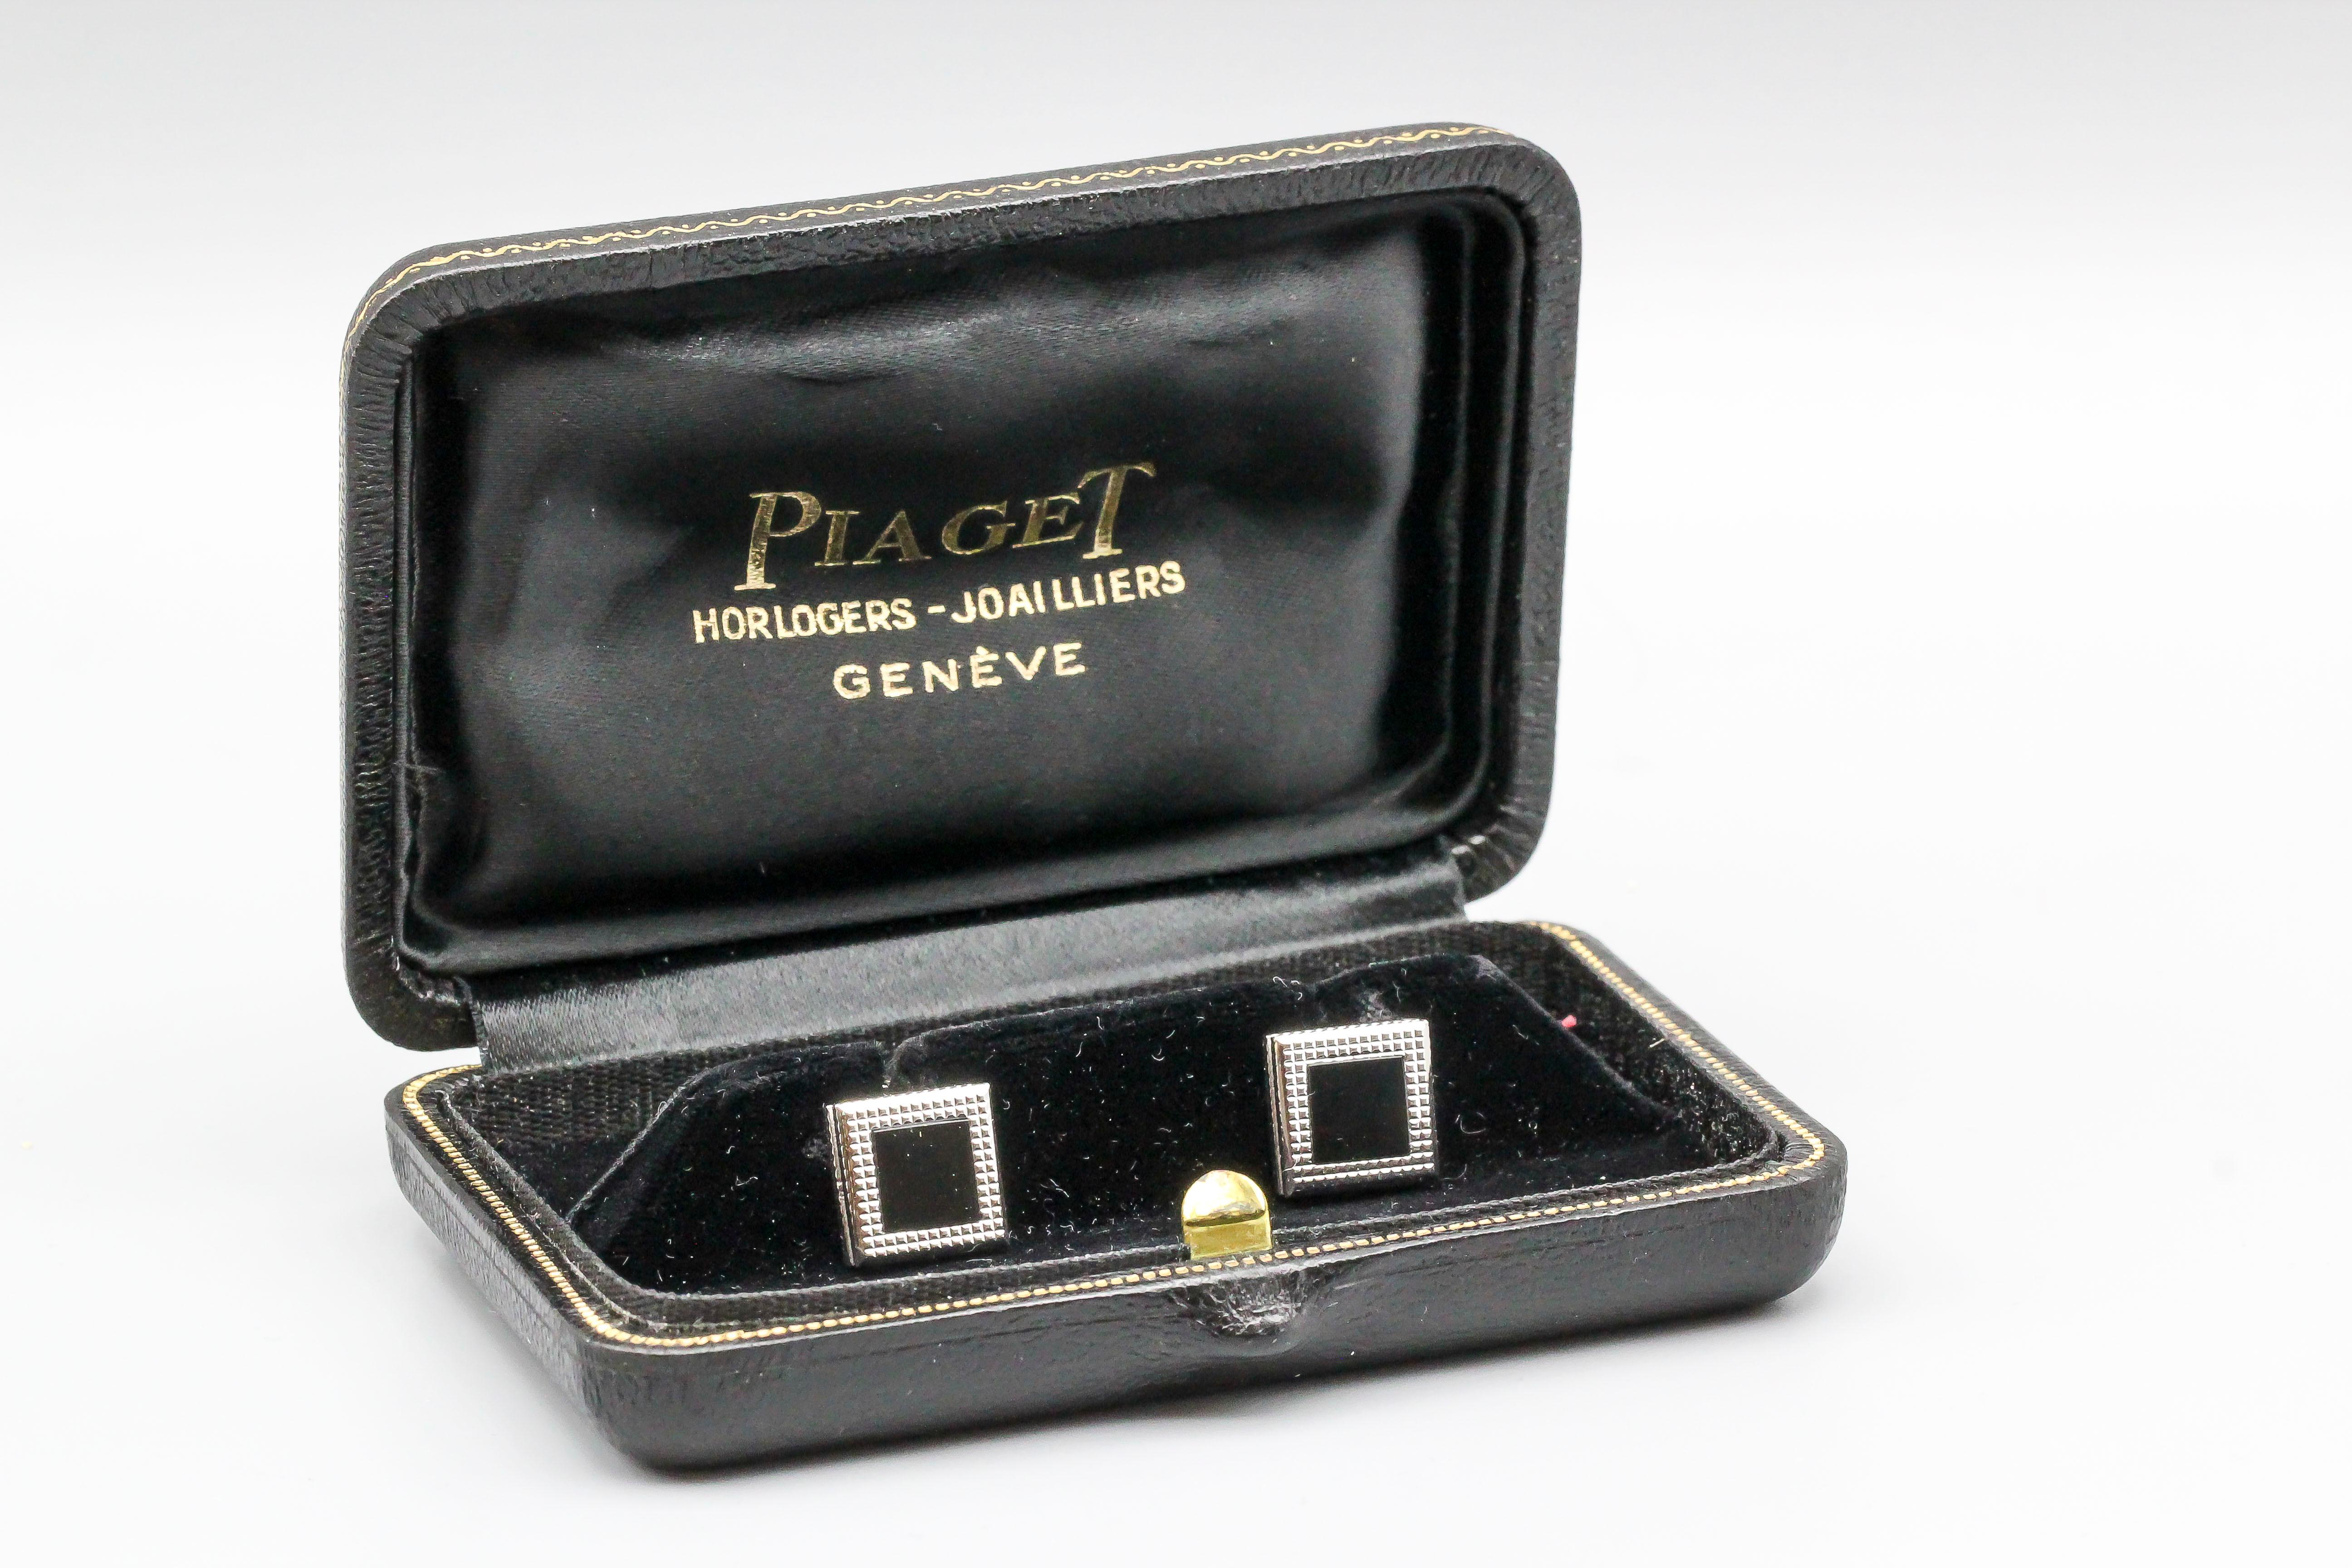 Handsome inlaid onyx and 18K white gold engine turned cufflinks by Piaget, circa 1970s. With original box.

Hallmarks: Piaget, 750.